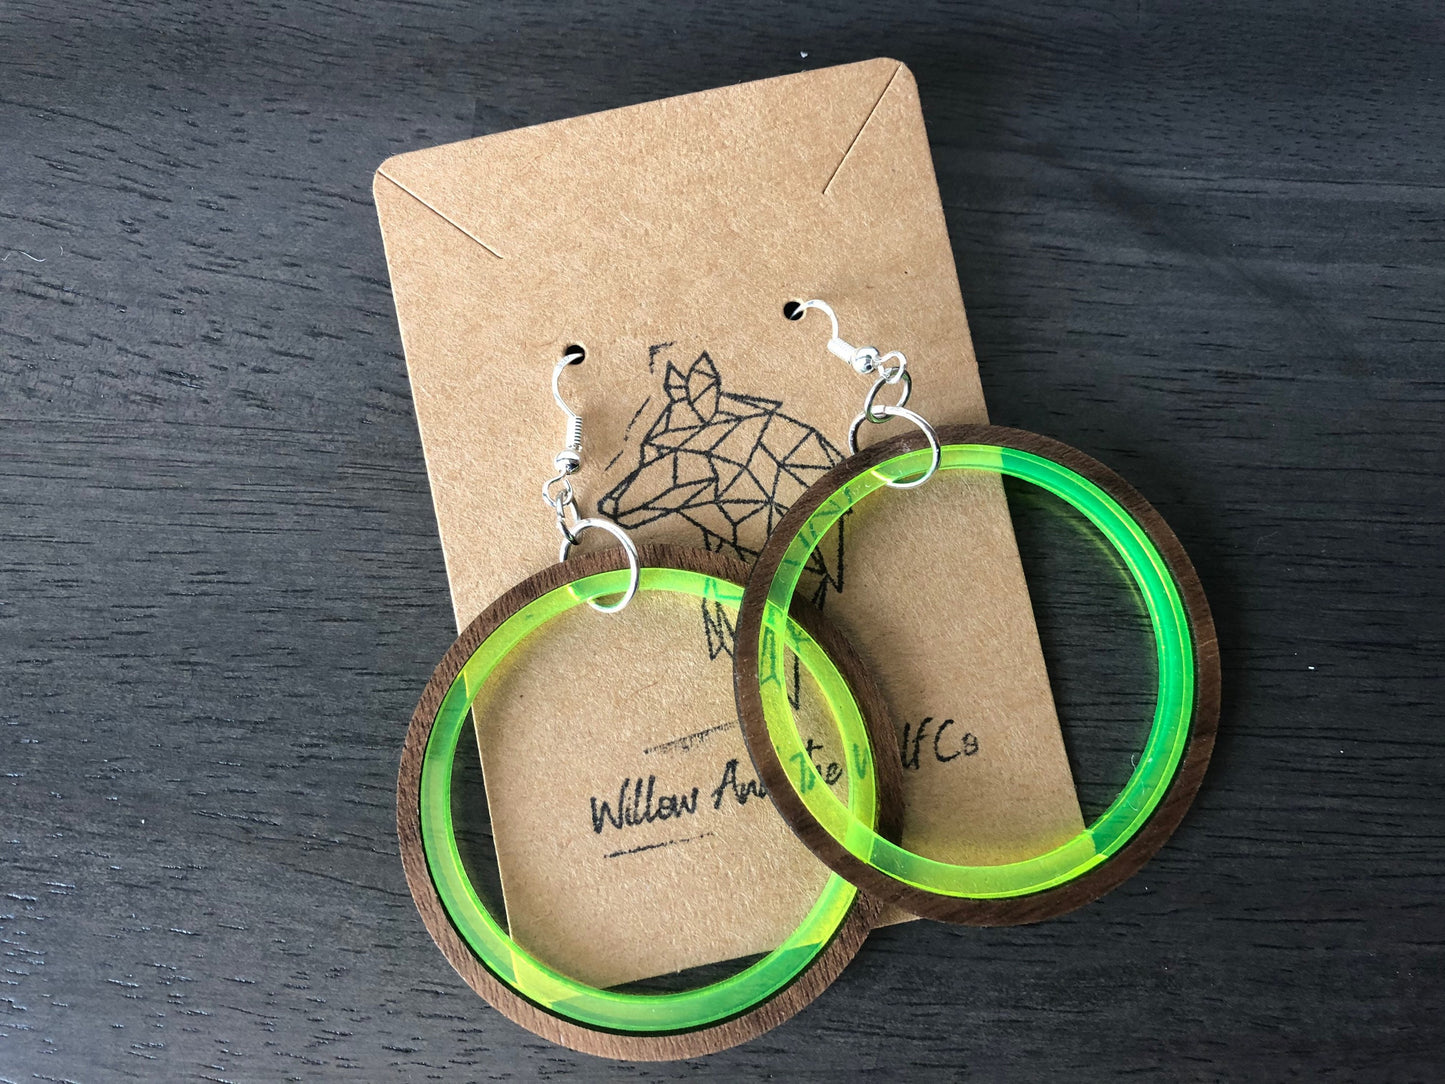 Neon Acrylic and Walnut Hoop Earrings. Indie Aesthetic. Indie Outfit. 90’s inspired Earrings. Fluorescent Pink and Neon Green Hoops.